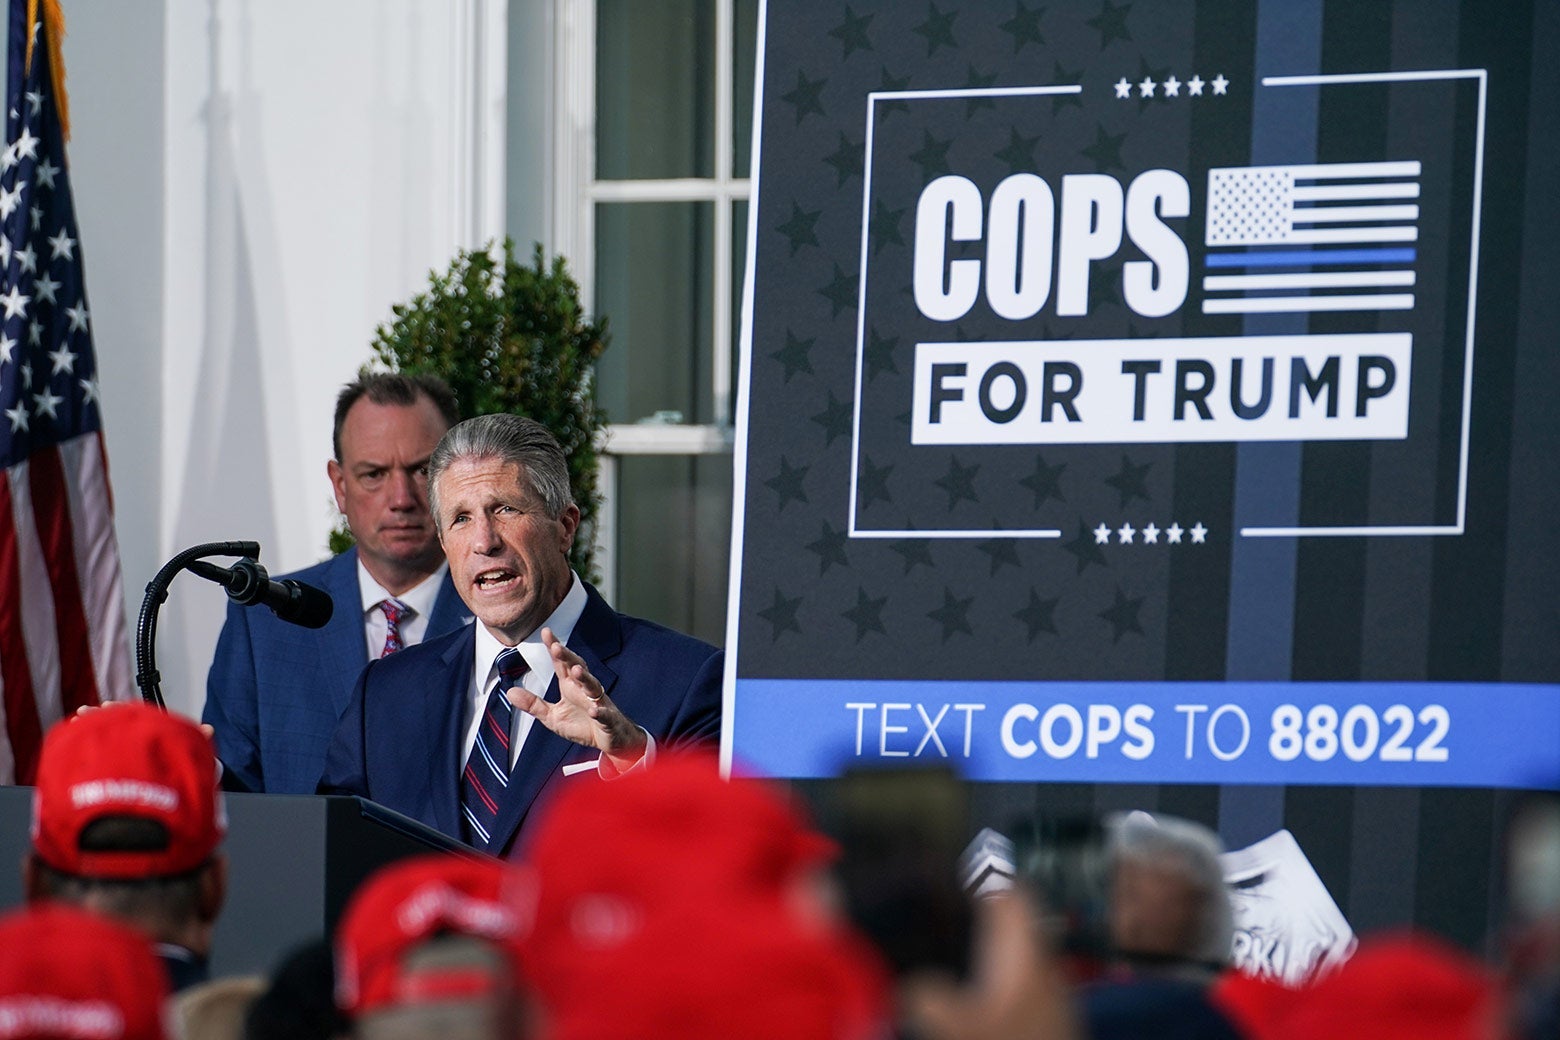 Lynch speaks at a lectern in front of a crowd of people wearing red MAGA hats. A sign to his left says COPS FOR TRUMP.